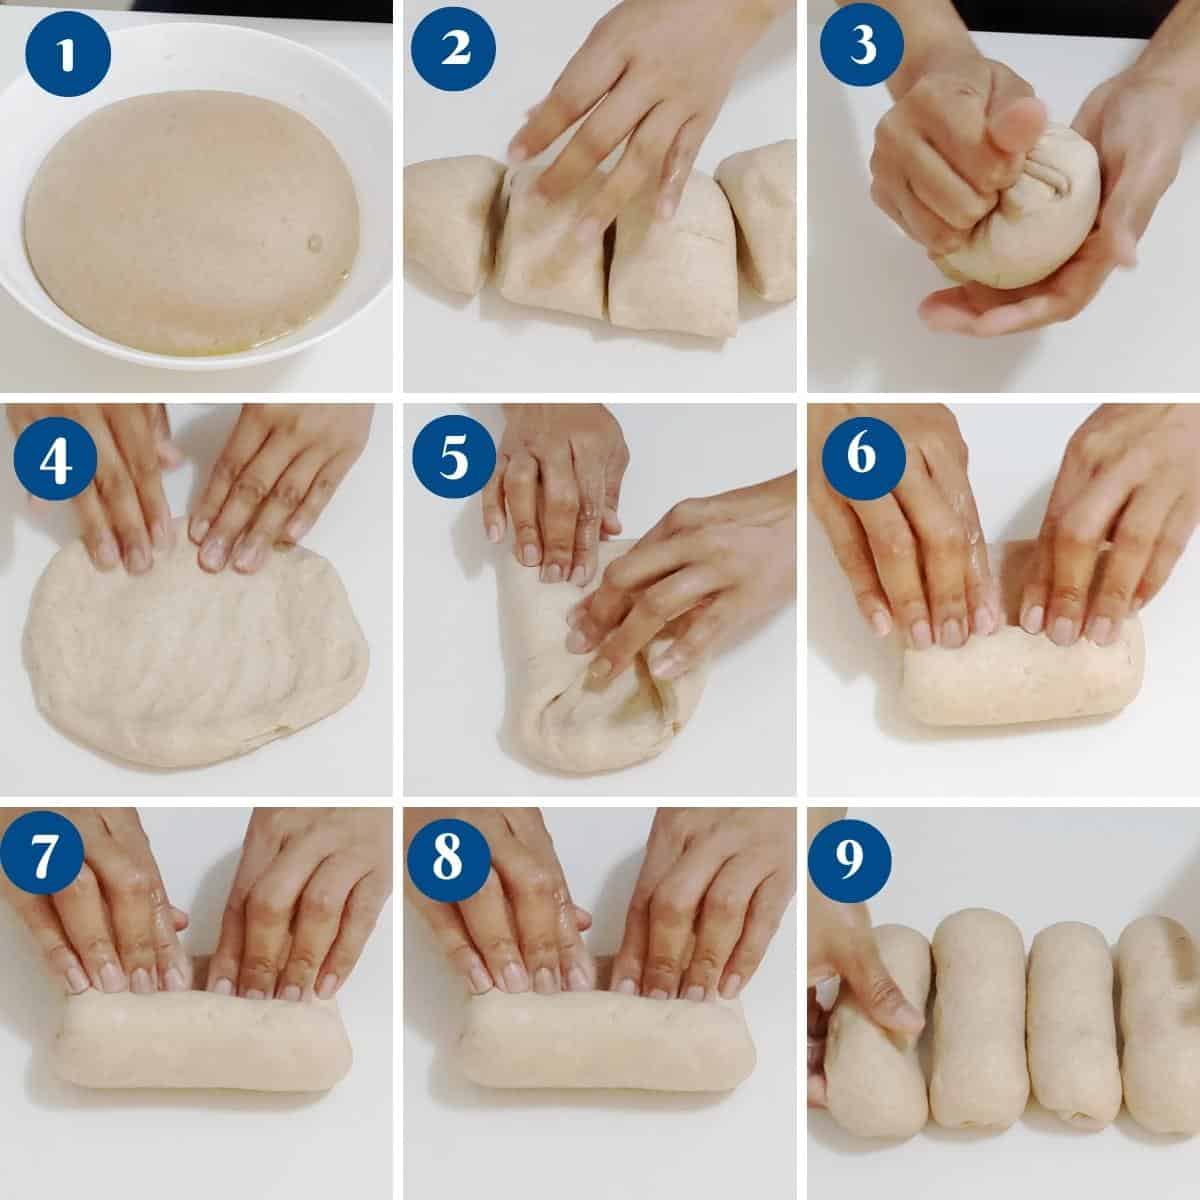 How to shape and bake the sandwich bread.